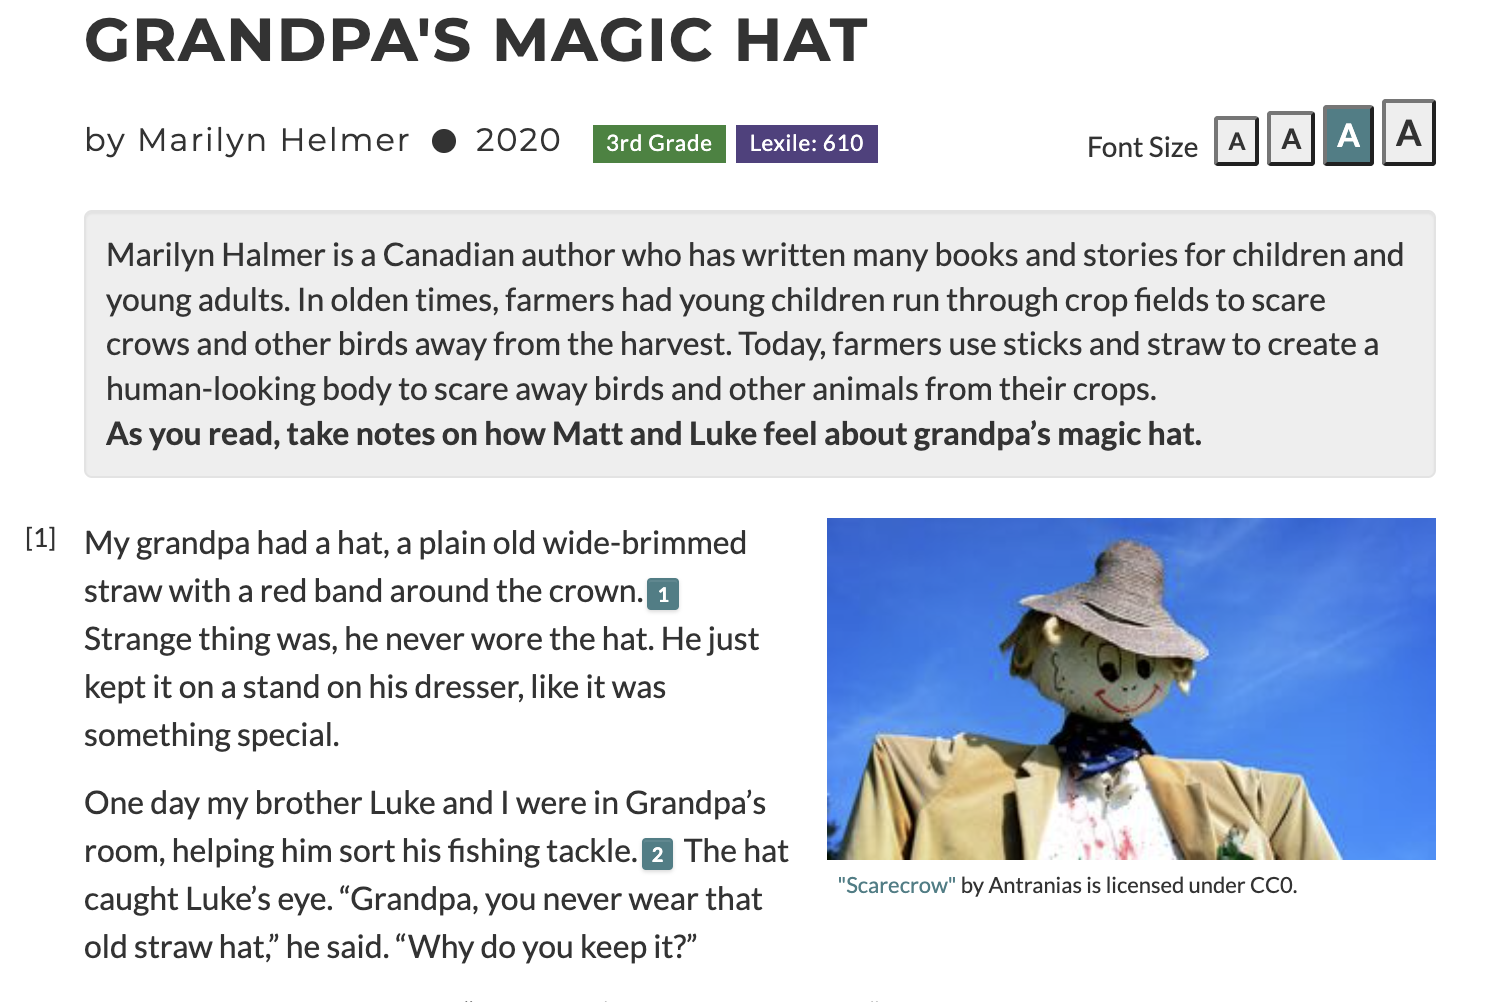 Screenshot of beginning of "Grandpa's Magic Hat" lesson including a picture of a scarecrow.